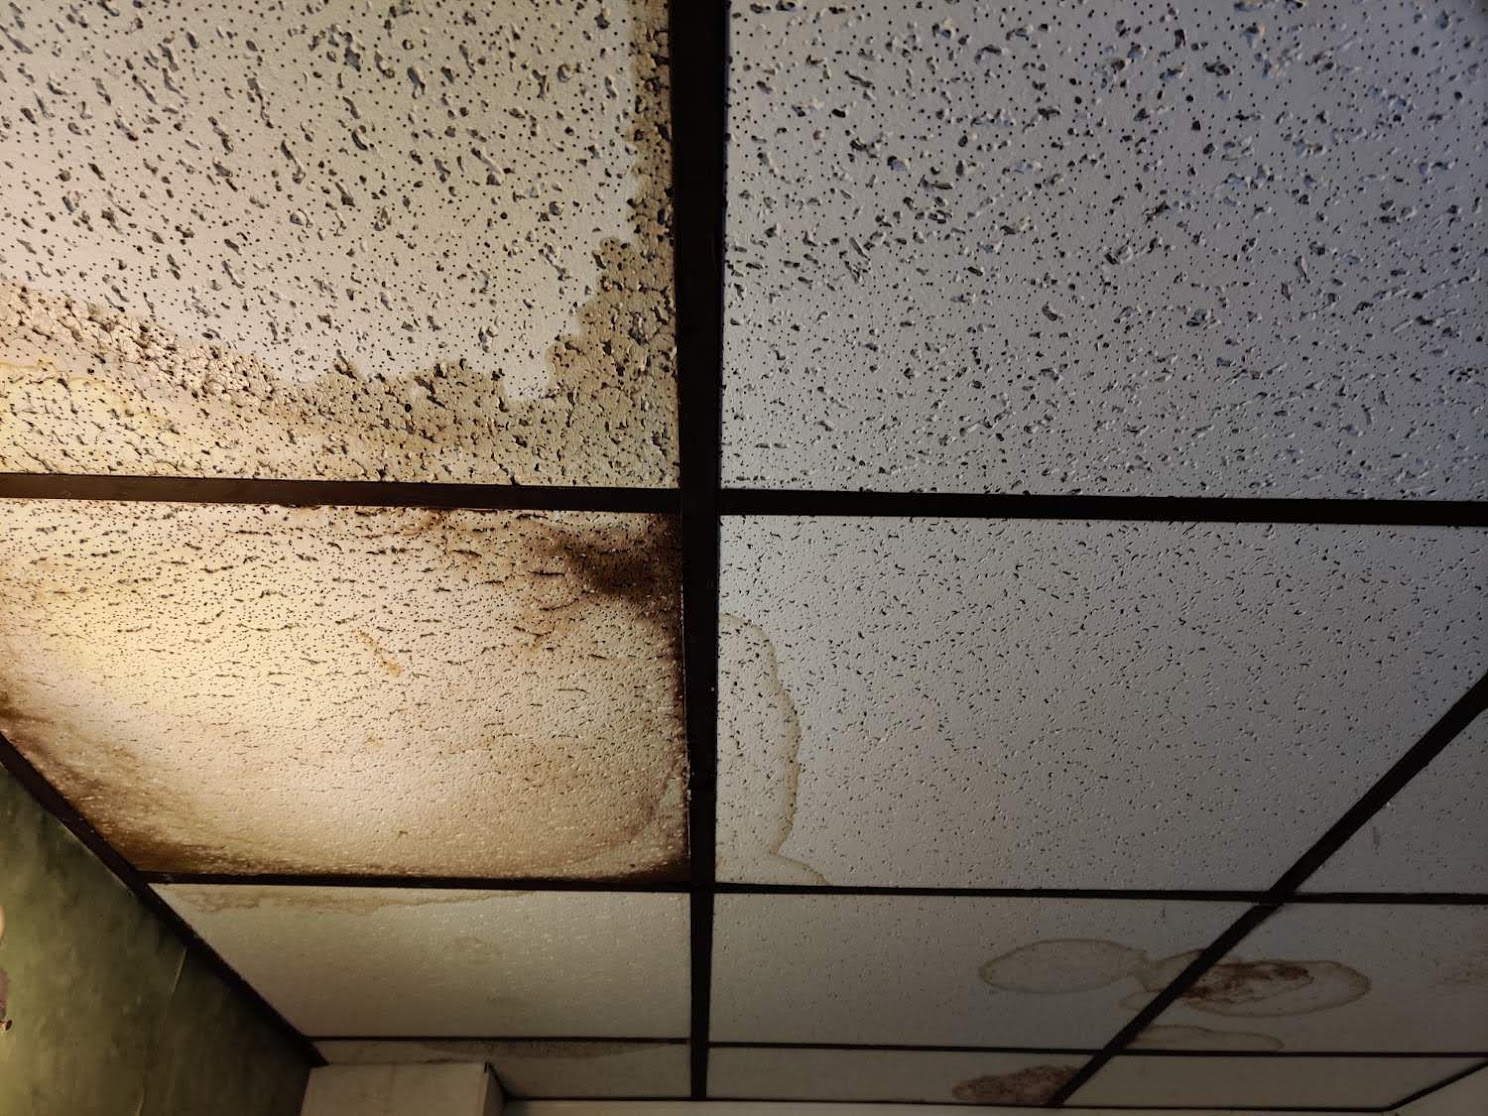 do ceiling tiles have asbestos